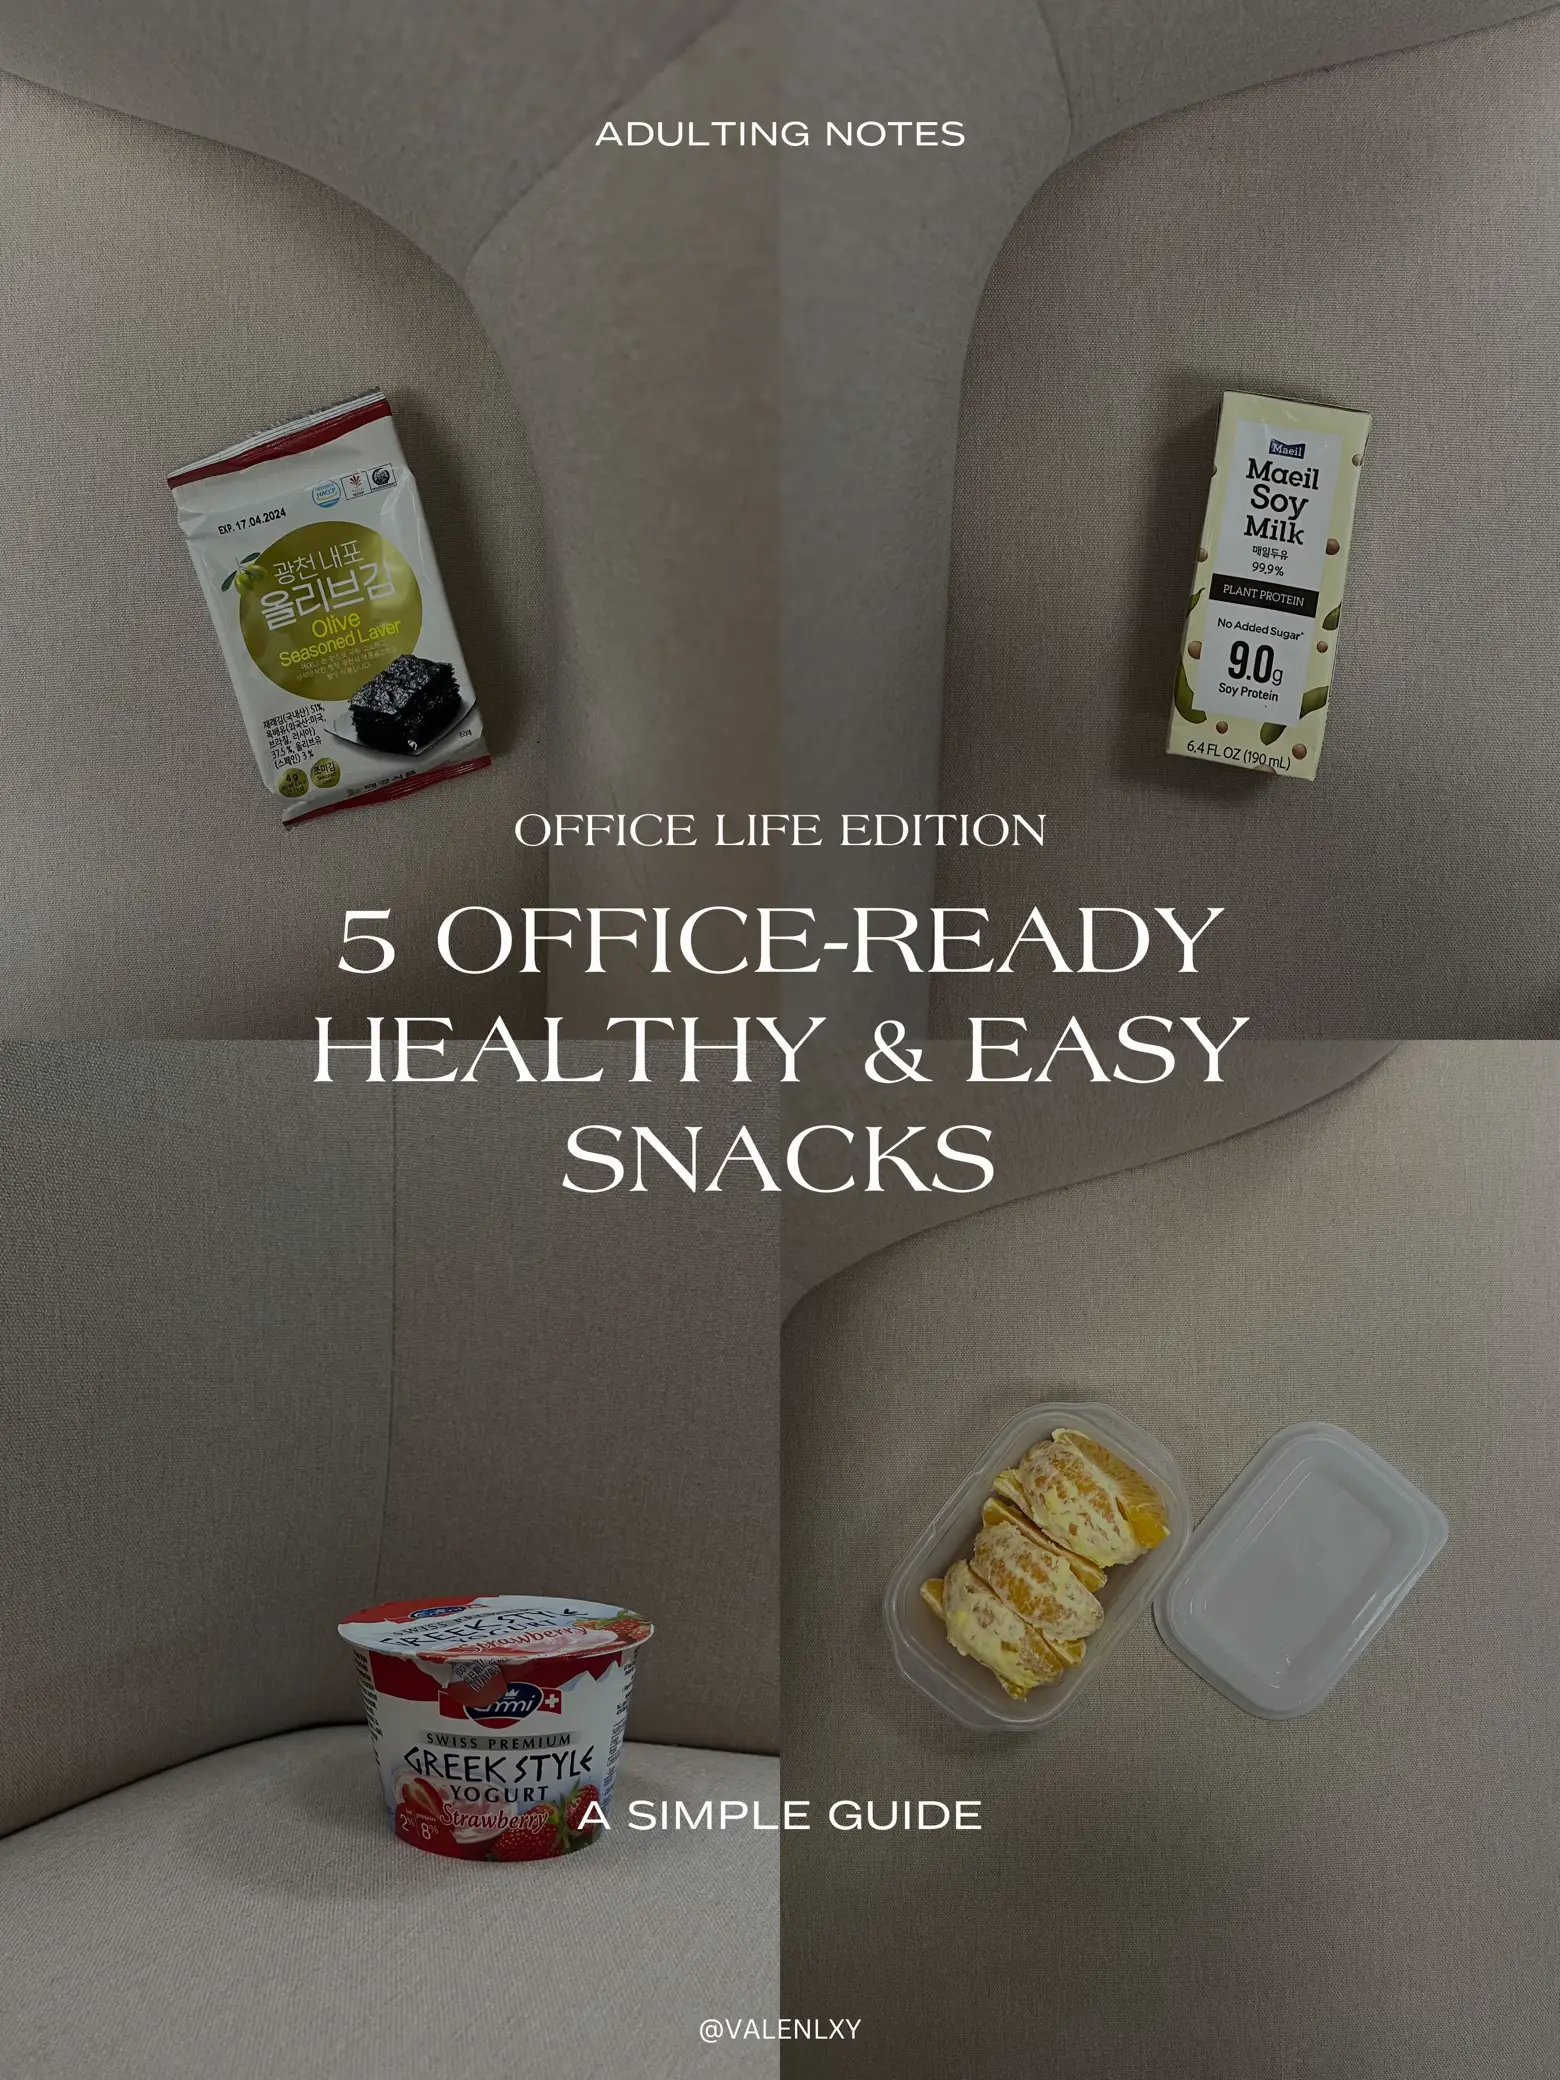 5️⃣ Healthy Office Snacks: Low-Cal Bites! 🥠 's images(0)